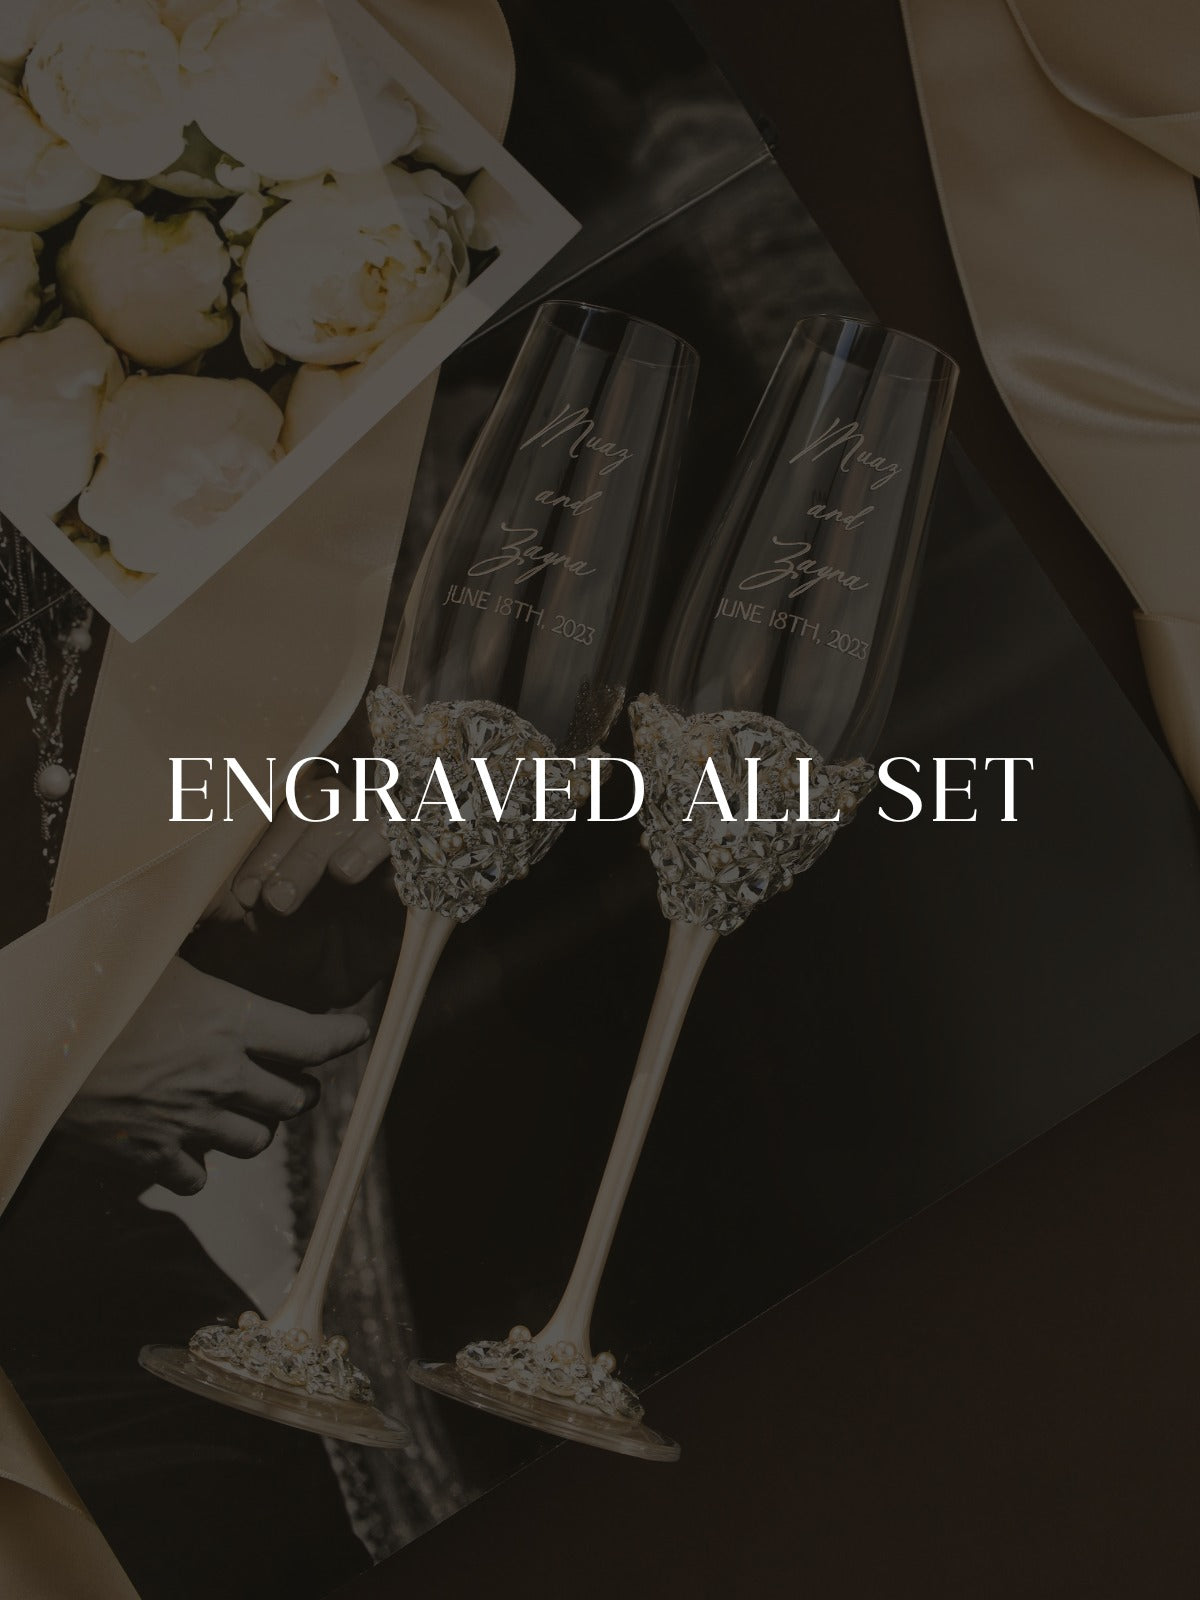 Engraved flutes and cake set